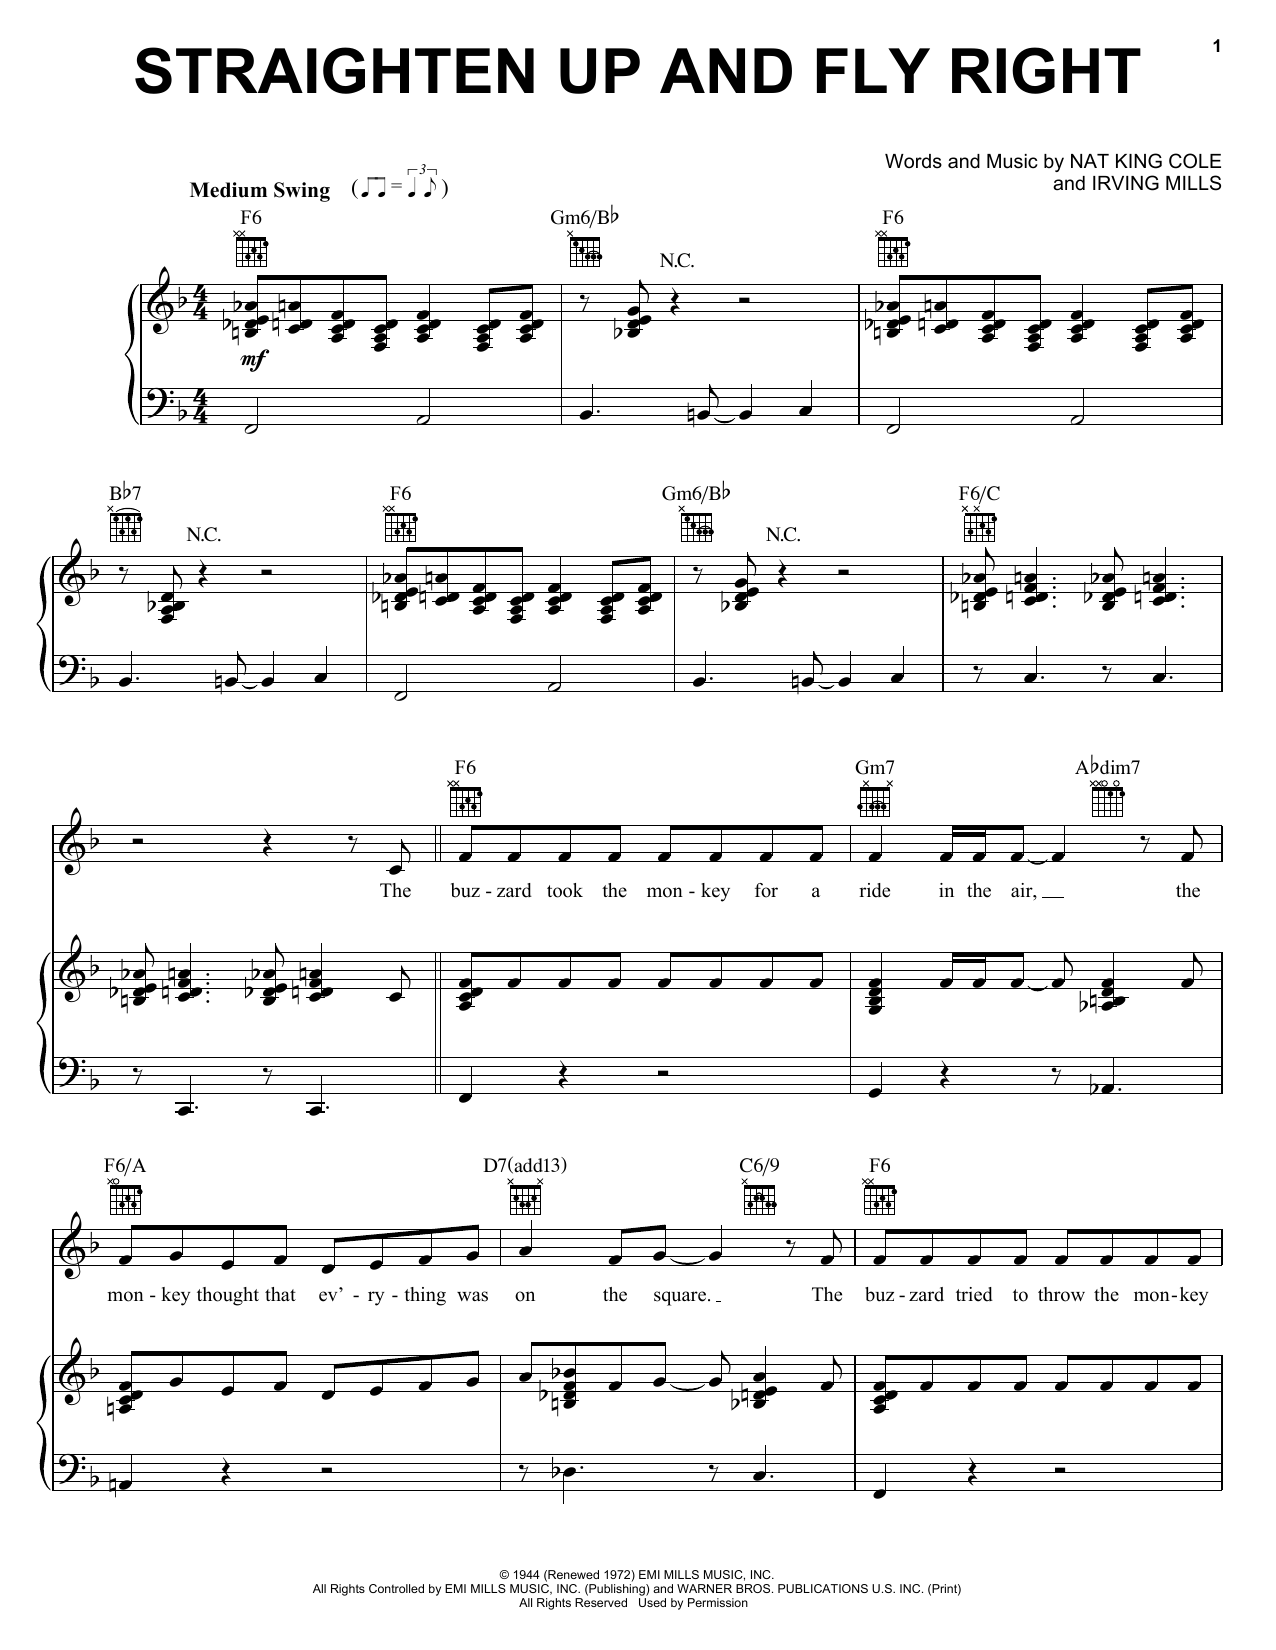 Diana Krall Straighten Up And Fly Right sheet music notes and chords. Download Printable PDF.